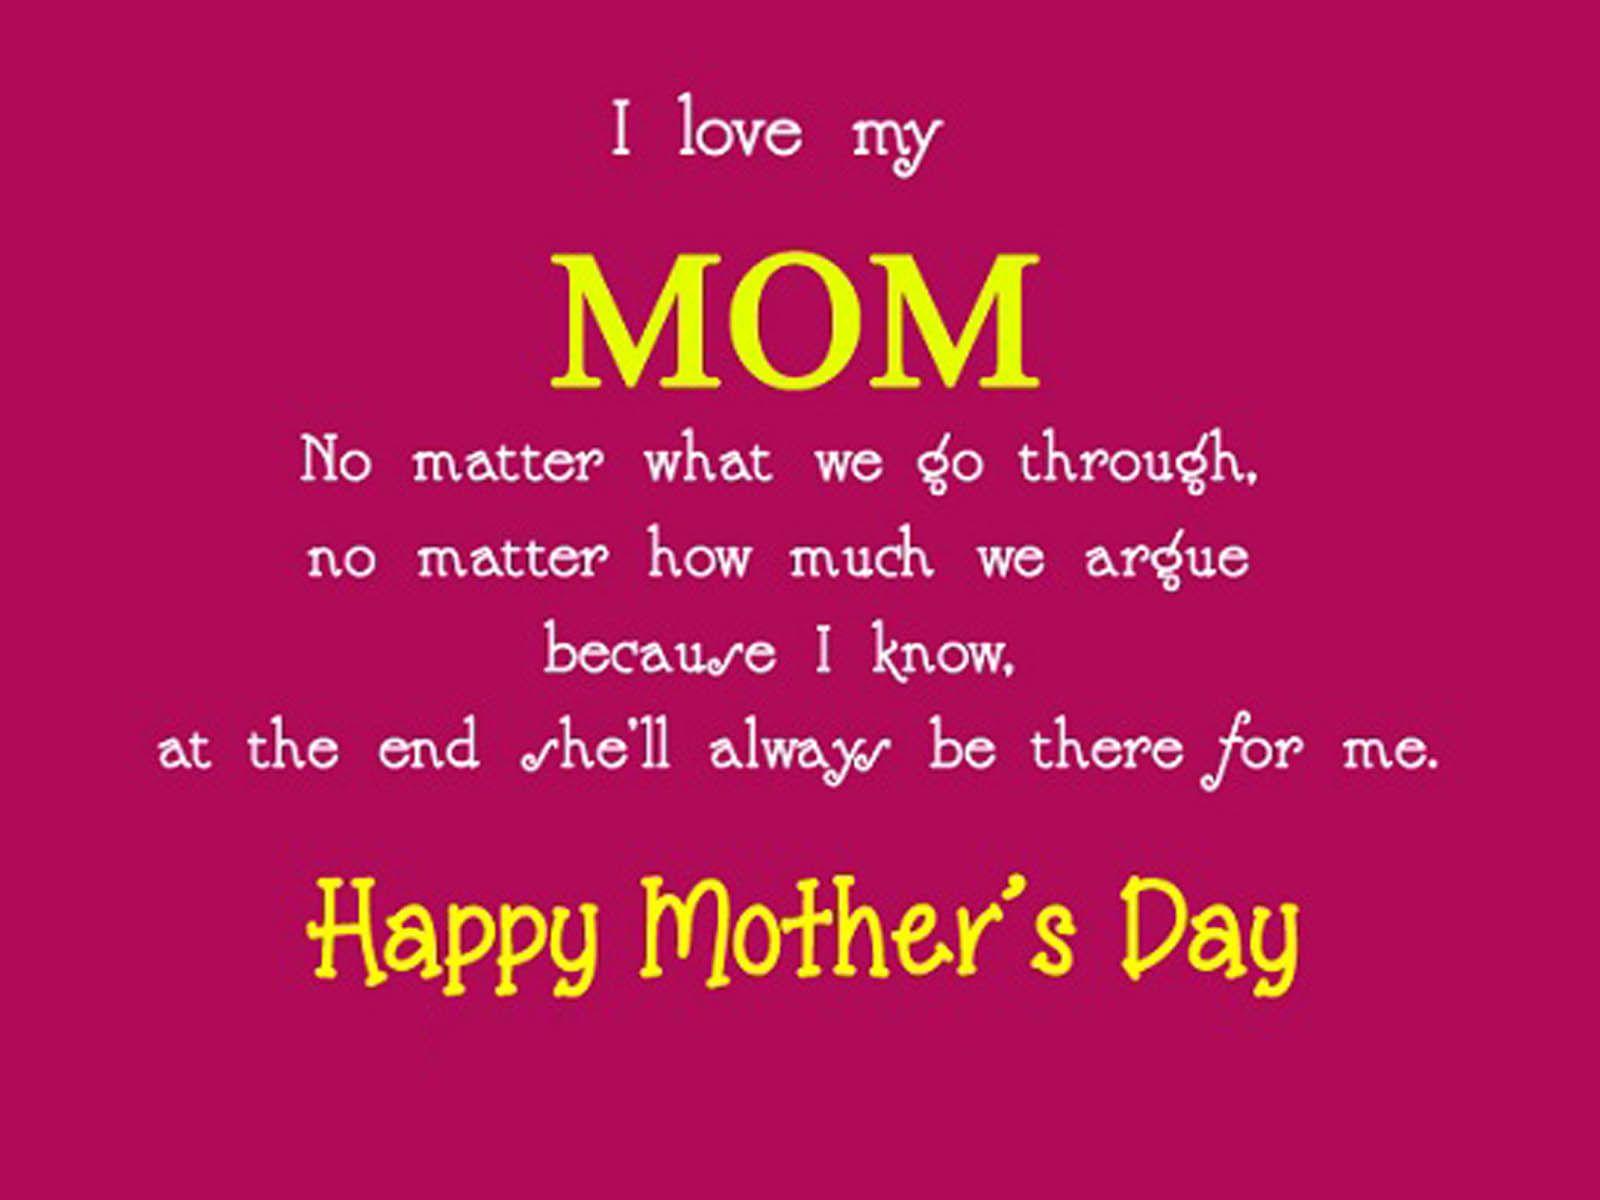 I Love My Mom Quotes Free Parents HD Wallpaper Mobile 1600×1200 I